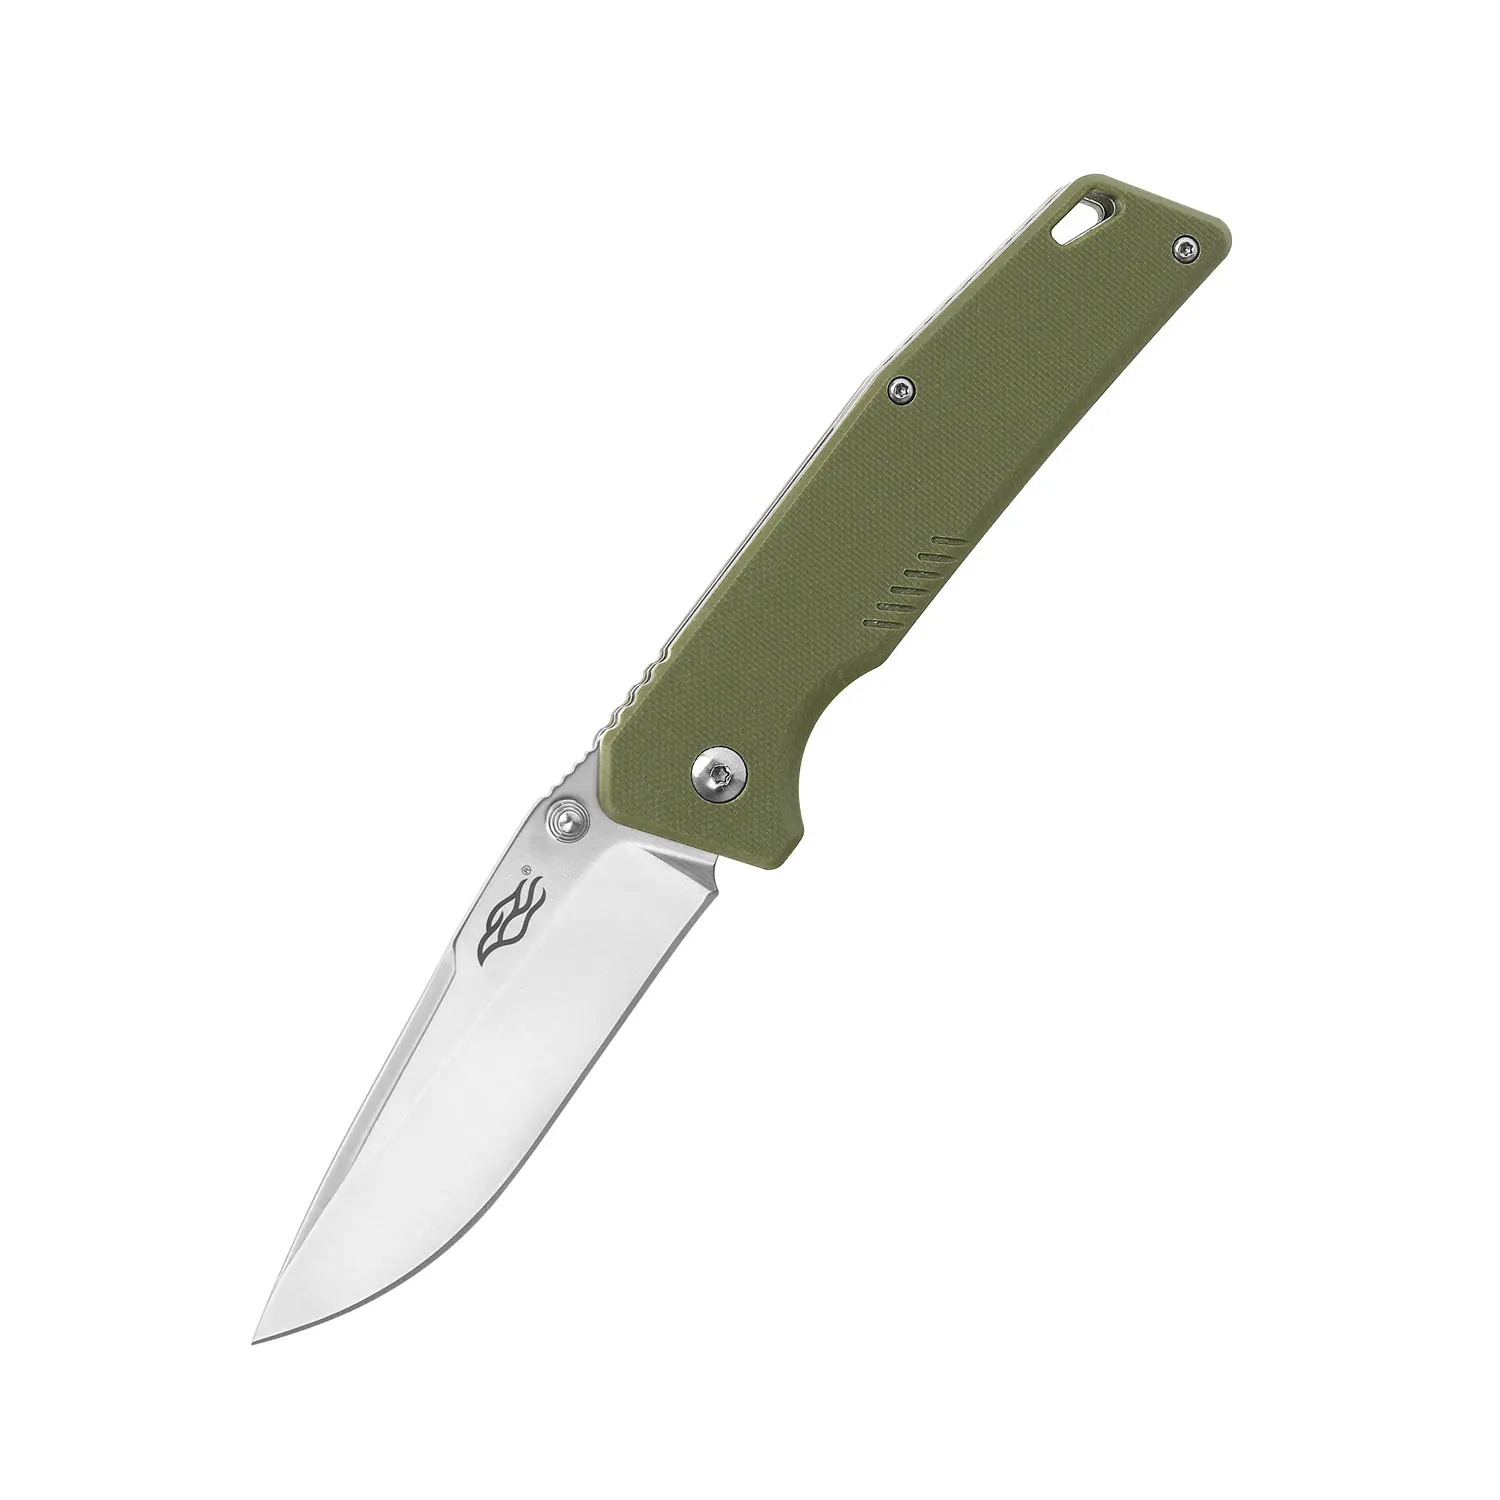  GANZO Firebird F7601 Pocket Folding Knife 440C Stainless Steel  Blade G-10 Anti-Slip Handle with Clip Hunting Gear Fishing Camping Folder  Outdoor EDC Knife (Green) : Sports & Outdoors